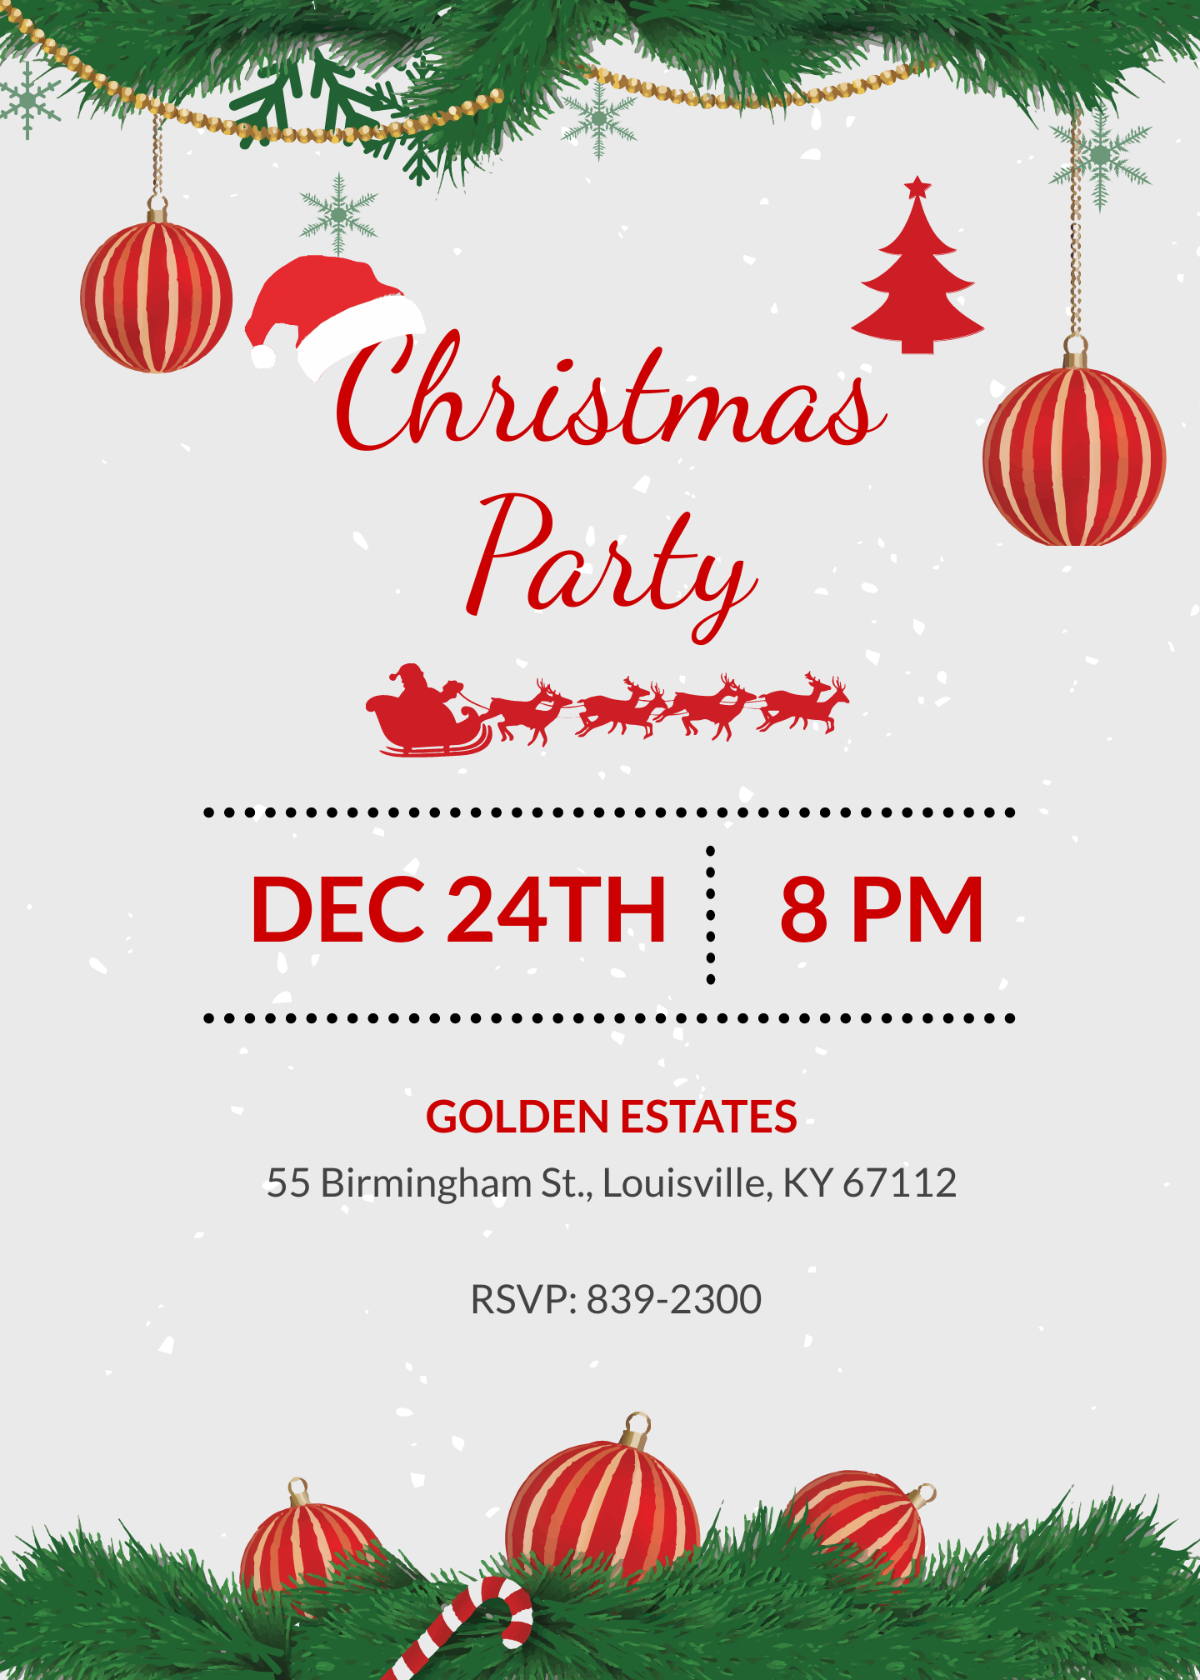 Merry Christmas party Invitation